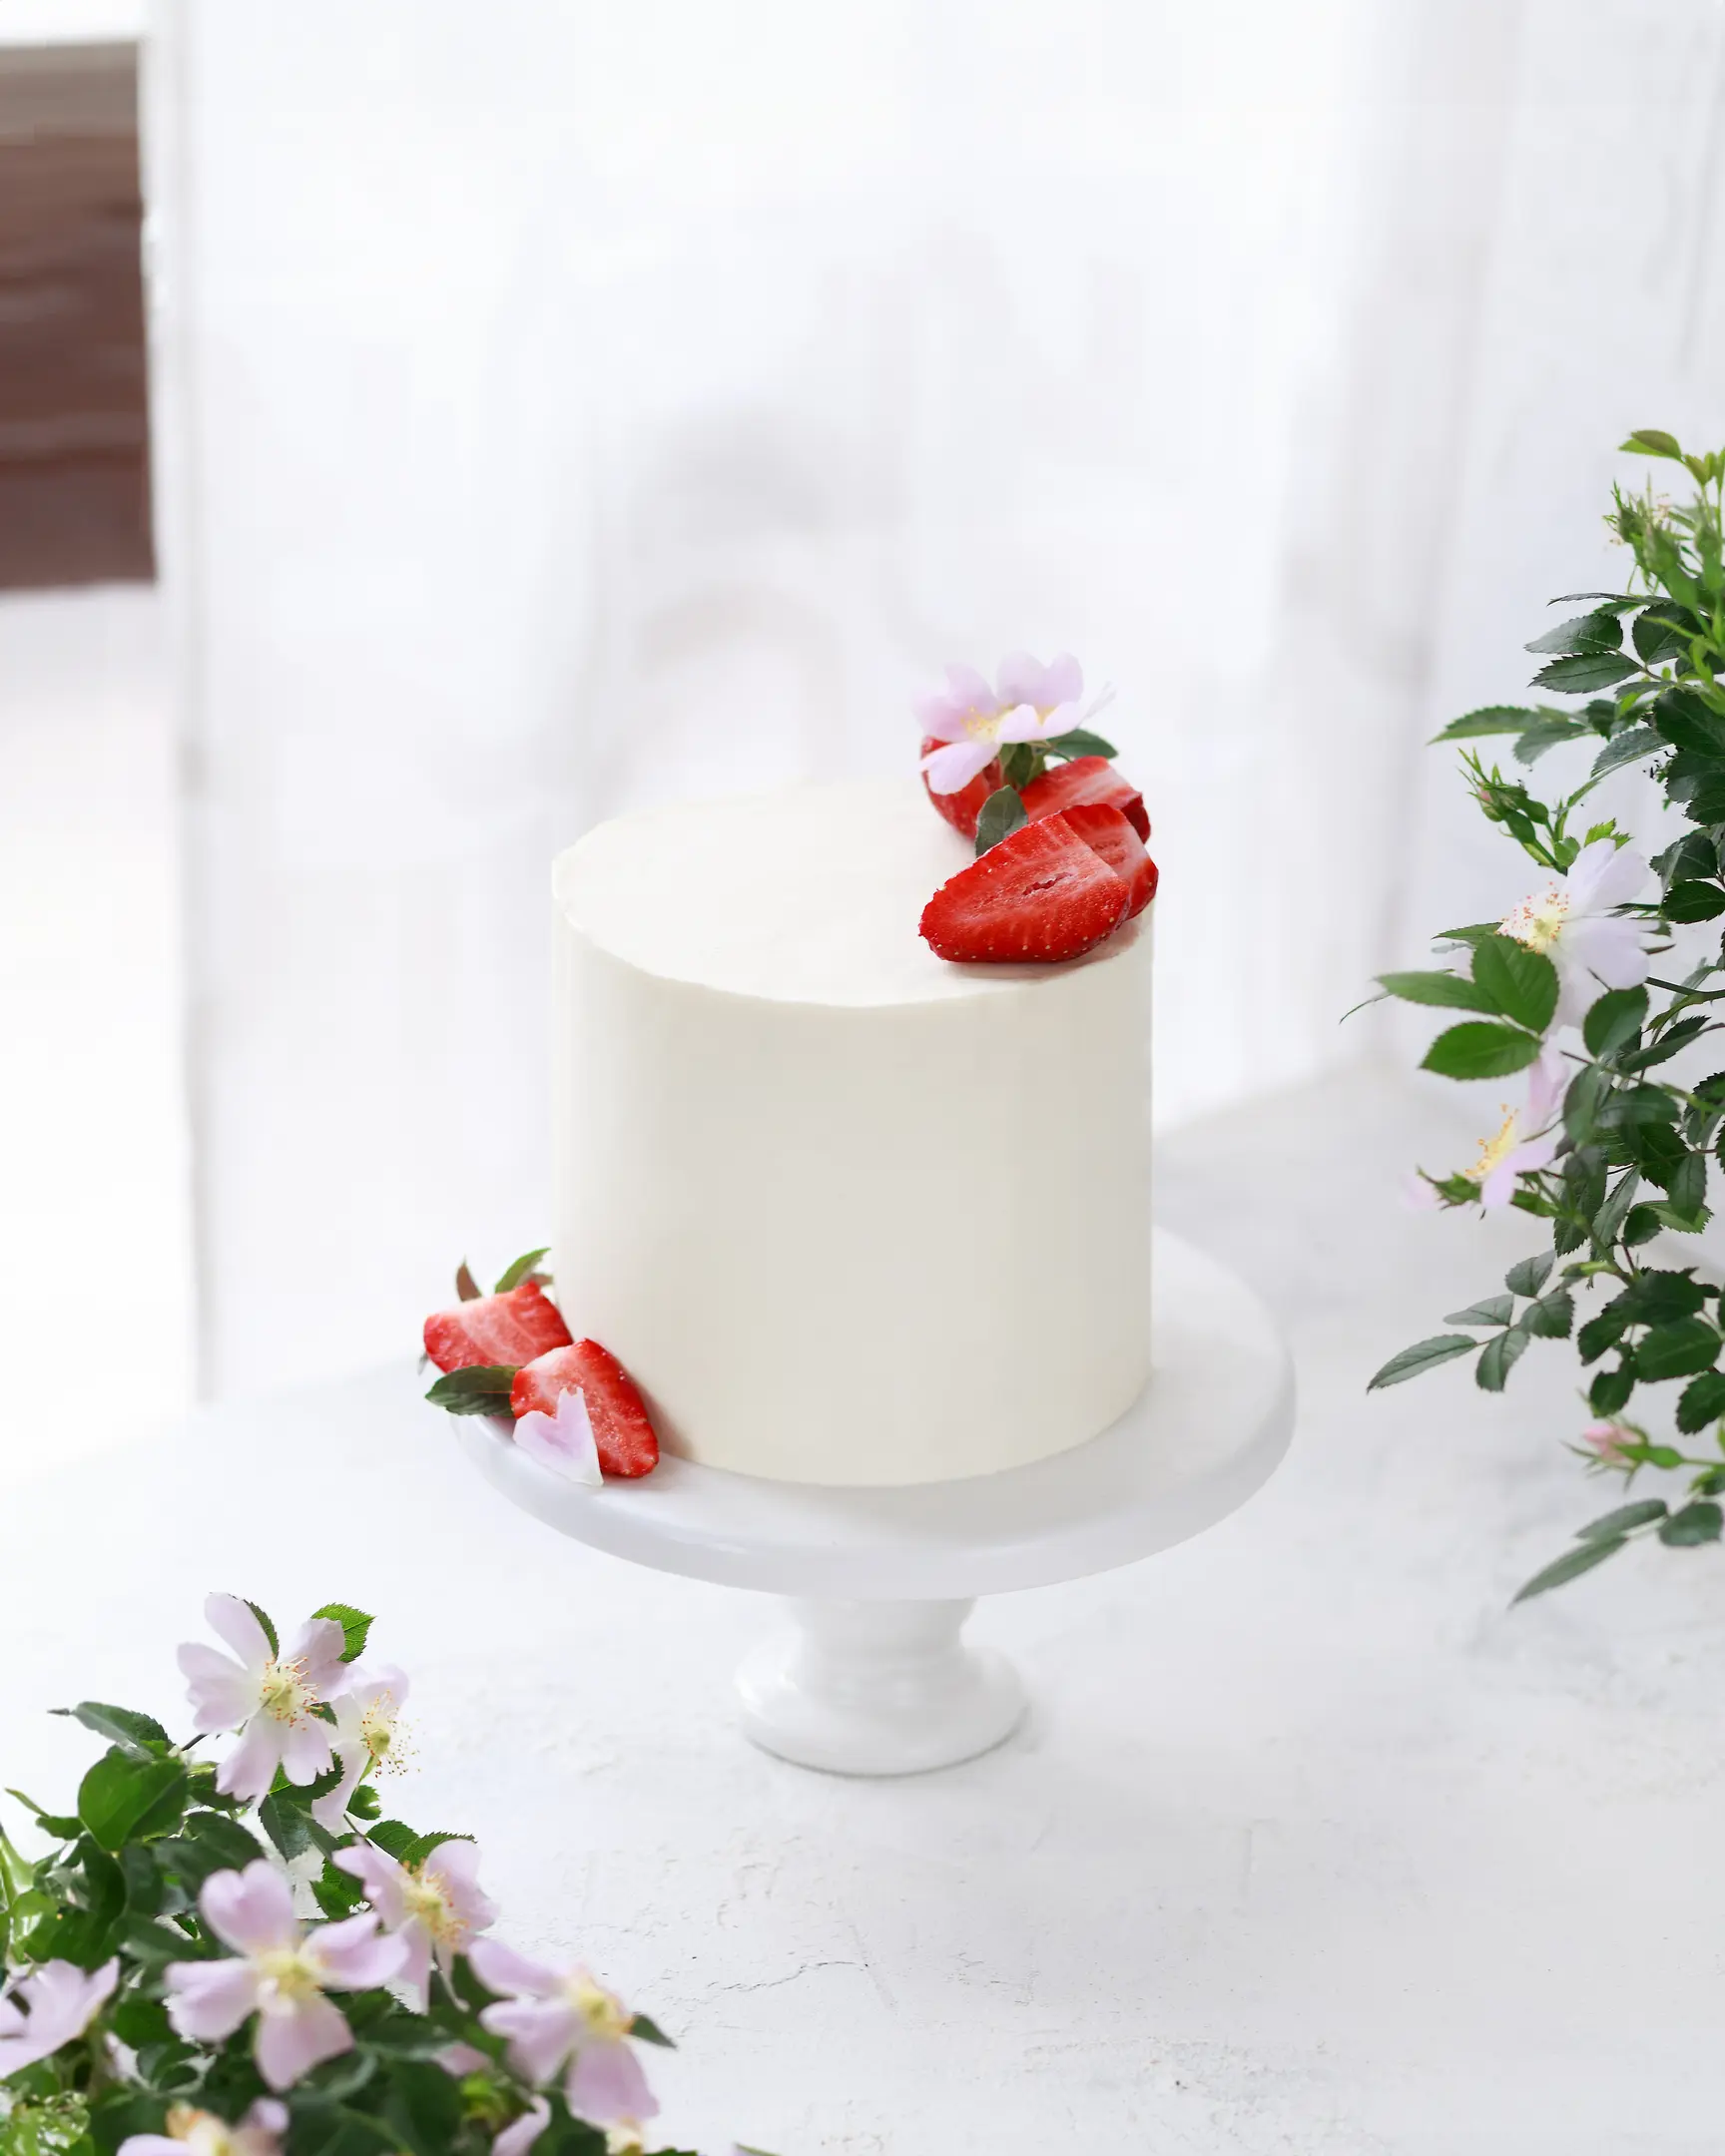 On a light background honey cake covered with white cream. On a light background opposite the window stands a cake decorated with berries. On the side of the frame, rosehip flowers are visible.